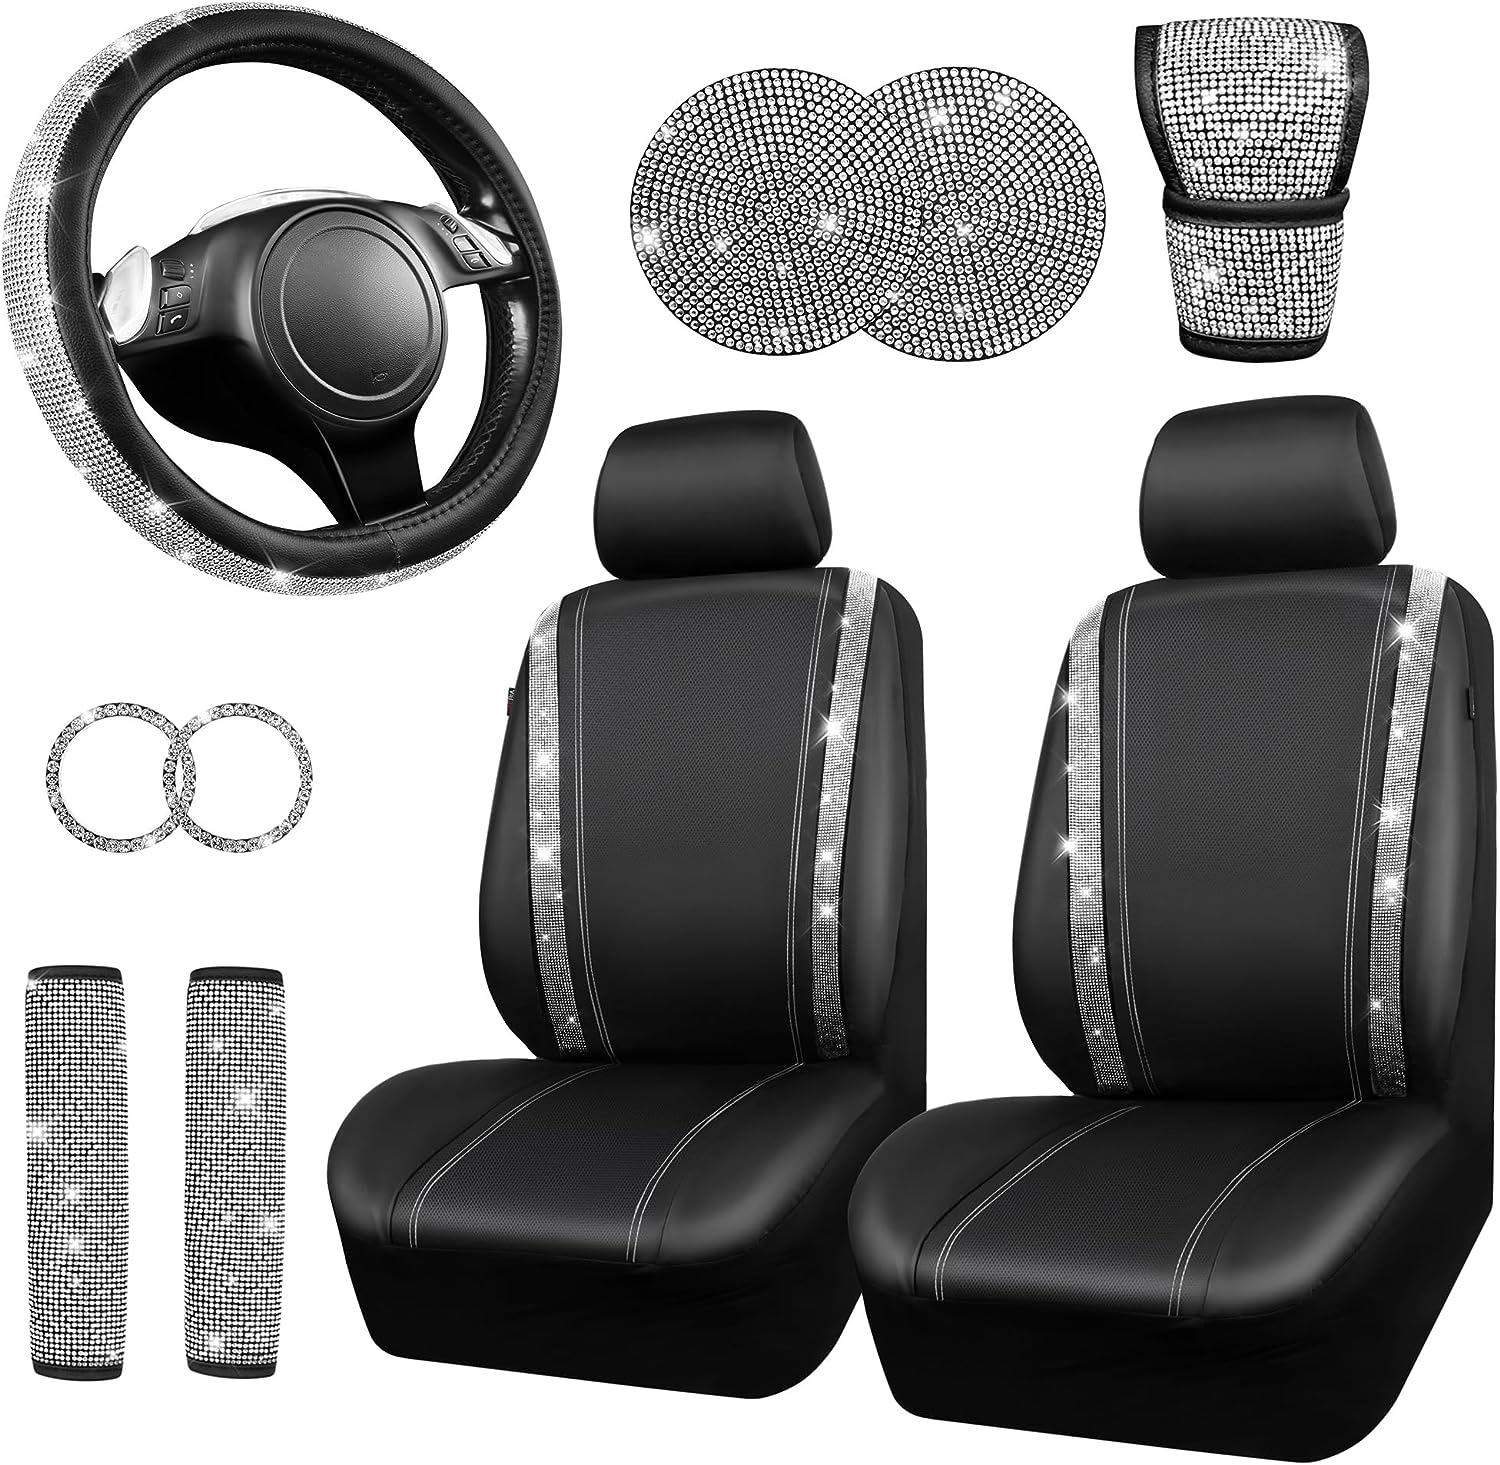 CAR PASS Leather Diamond Bling Seat Covers Sets 12 pcs, Bling Car Accessories Set for Women, Sparkly Rhinestone Steering Wheel Cover Sets, Glitter Cute Car Interior Sets for Women Girl, Silver Diamond